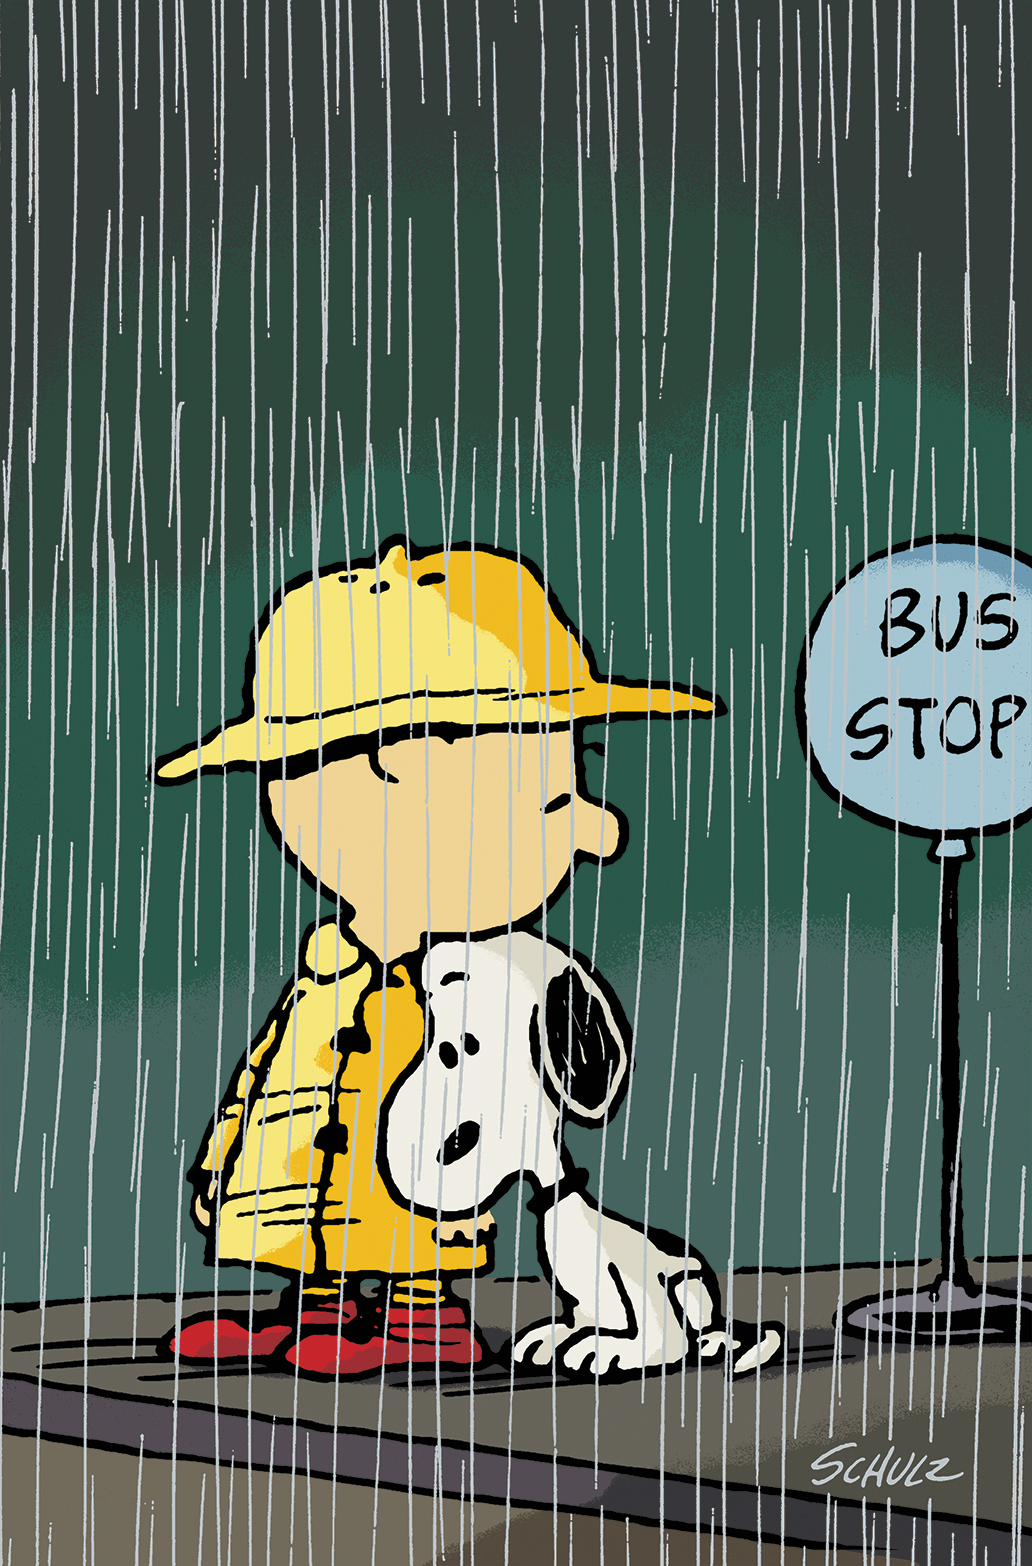 Cover by Charles M. Schulz